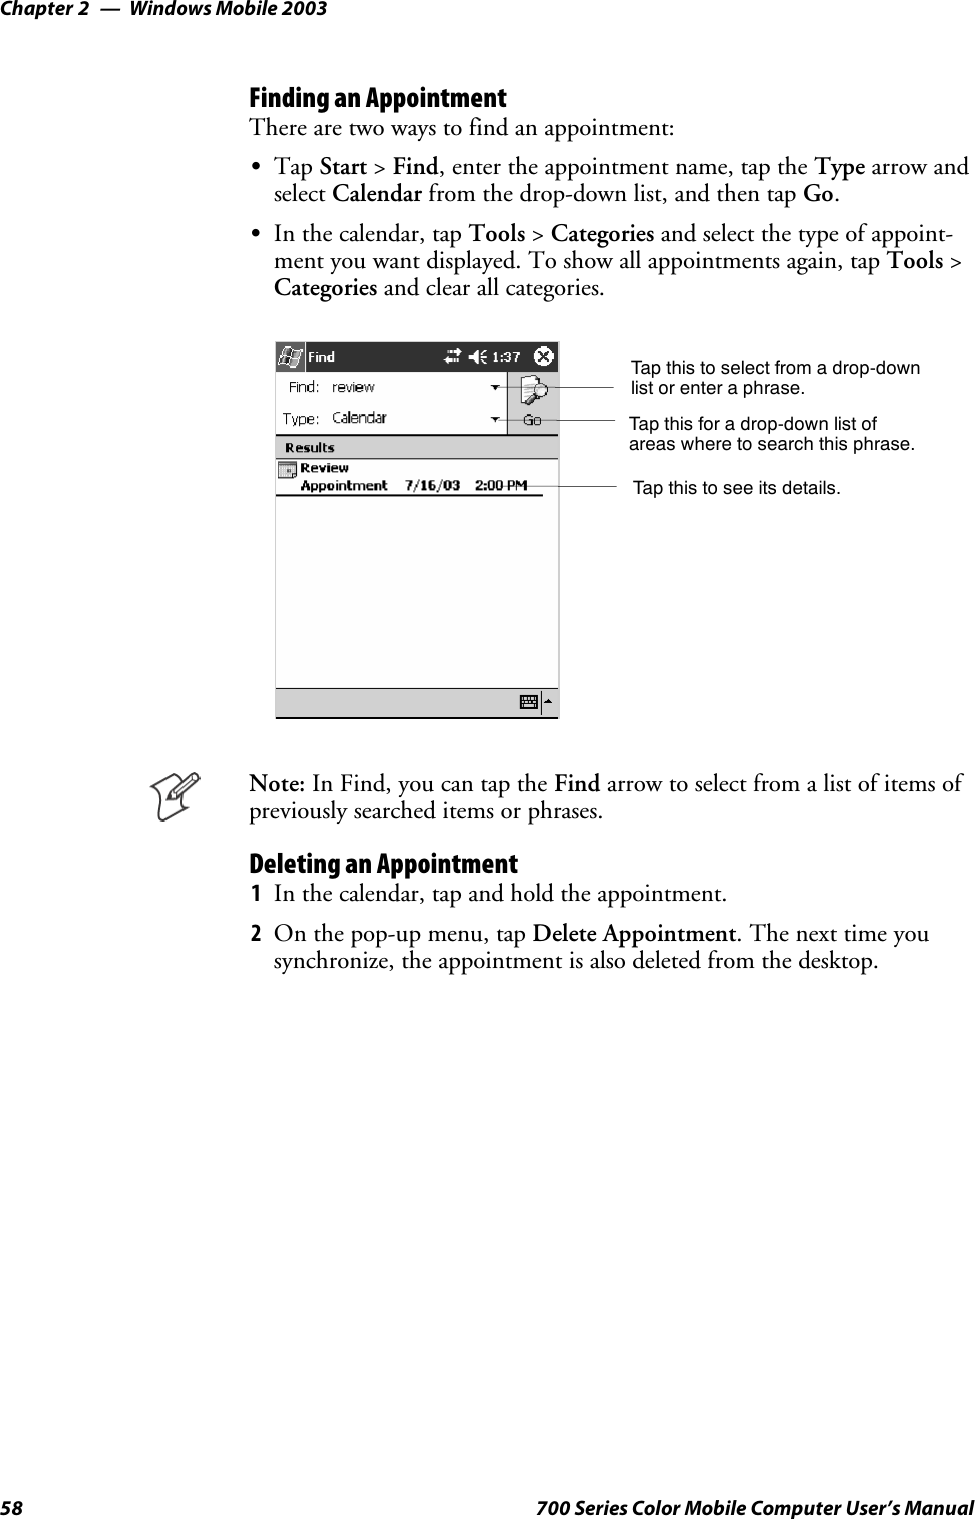 Windows Mobile 2003Chapter —258 700 Series Color Mobile Computer User’s ManualFinding an AppointmentThere are two ways to find an appointment:STap Start &gt;Find, enter the appointment name, tap the Type arrow andselect Calendar from the drop-down list, and then tap Go.SIn the calendar, tap Tools &gt;Categories and select the type of appoint-ment you want displayed. To show all appointments again, tap Tools &gt;Categories and clear all categories.Tap this to select from a drop-downlist or enter a phrase.Tap this for a drop-down list ofareas where to search this phrase.Tap this to see its details.Note: In Find, you can tap the Find arrow to select from a list of items ofpreviously searched items or phrases.Deleting an Appointment1In the calendar, tap and hold the appointment.2On the pop-up menu, tap Delete Appointment.Thenexttimeyousynchronize, the appointment is also deleted from the desktop.